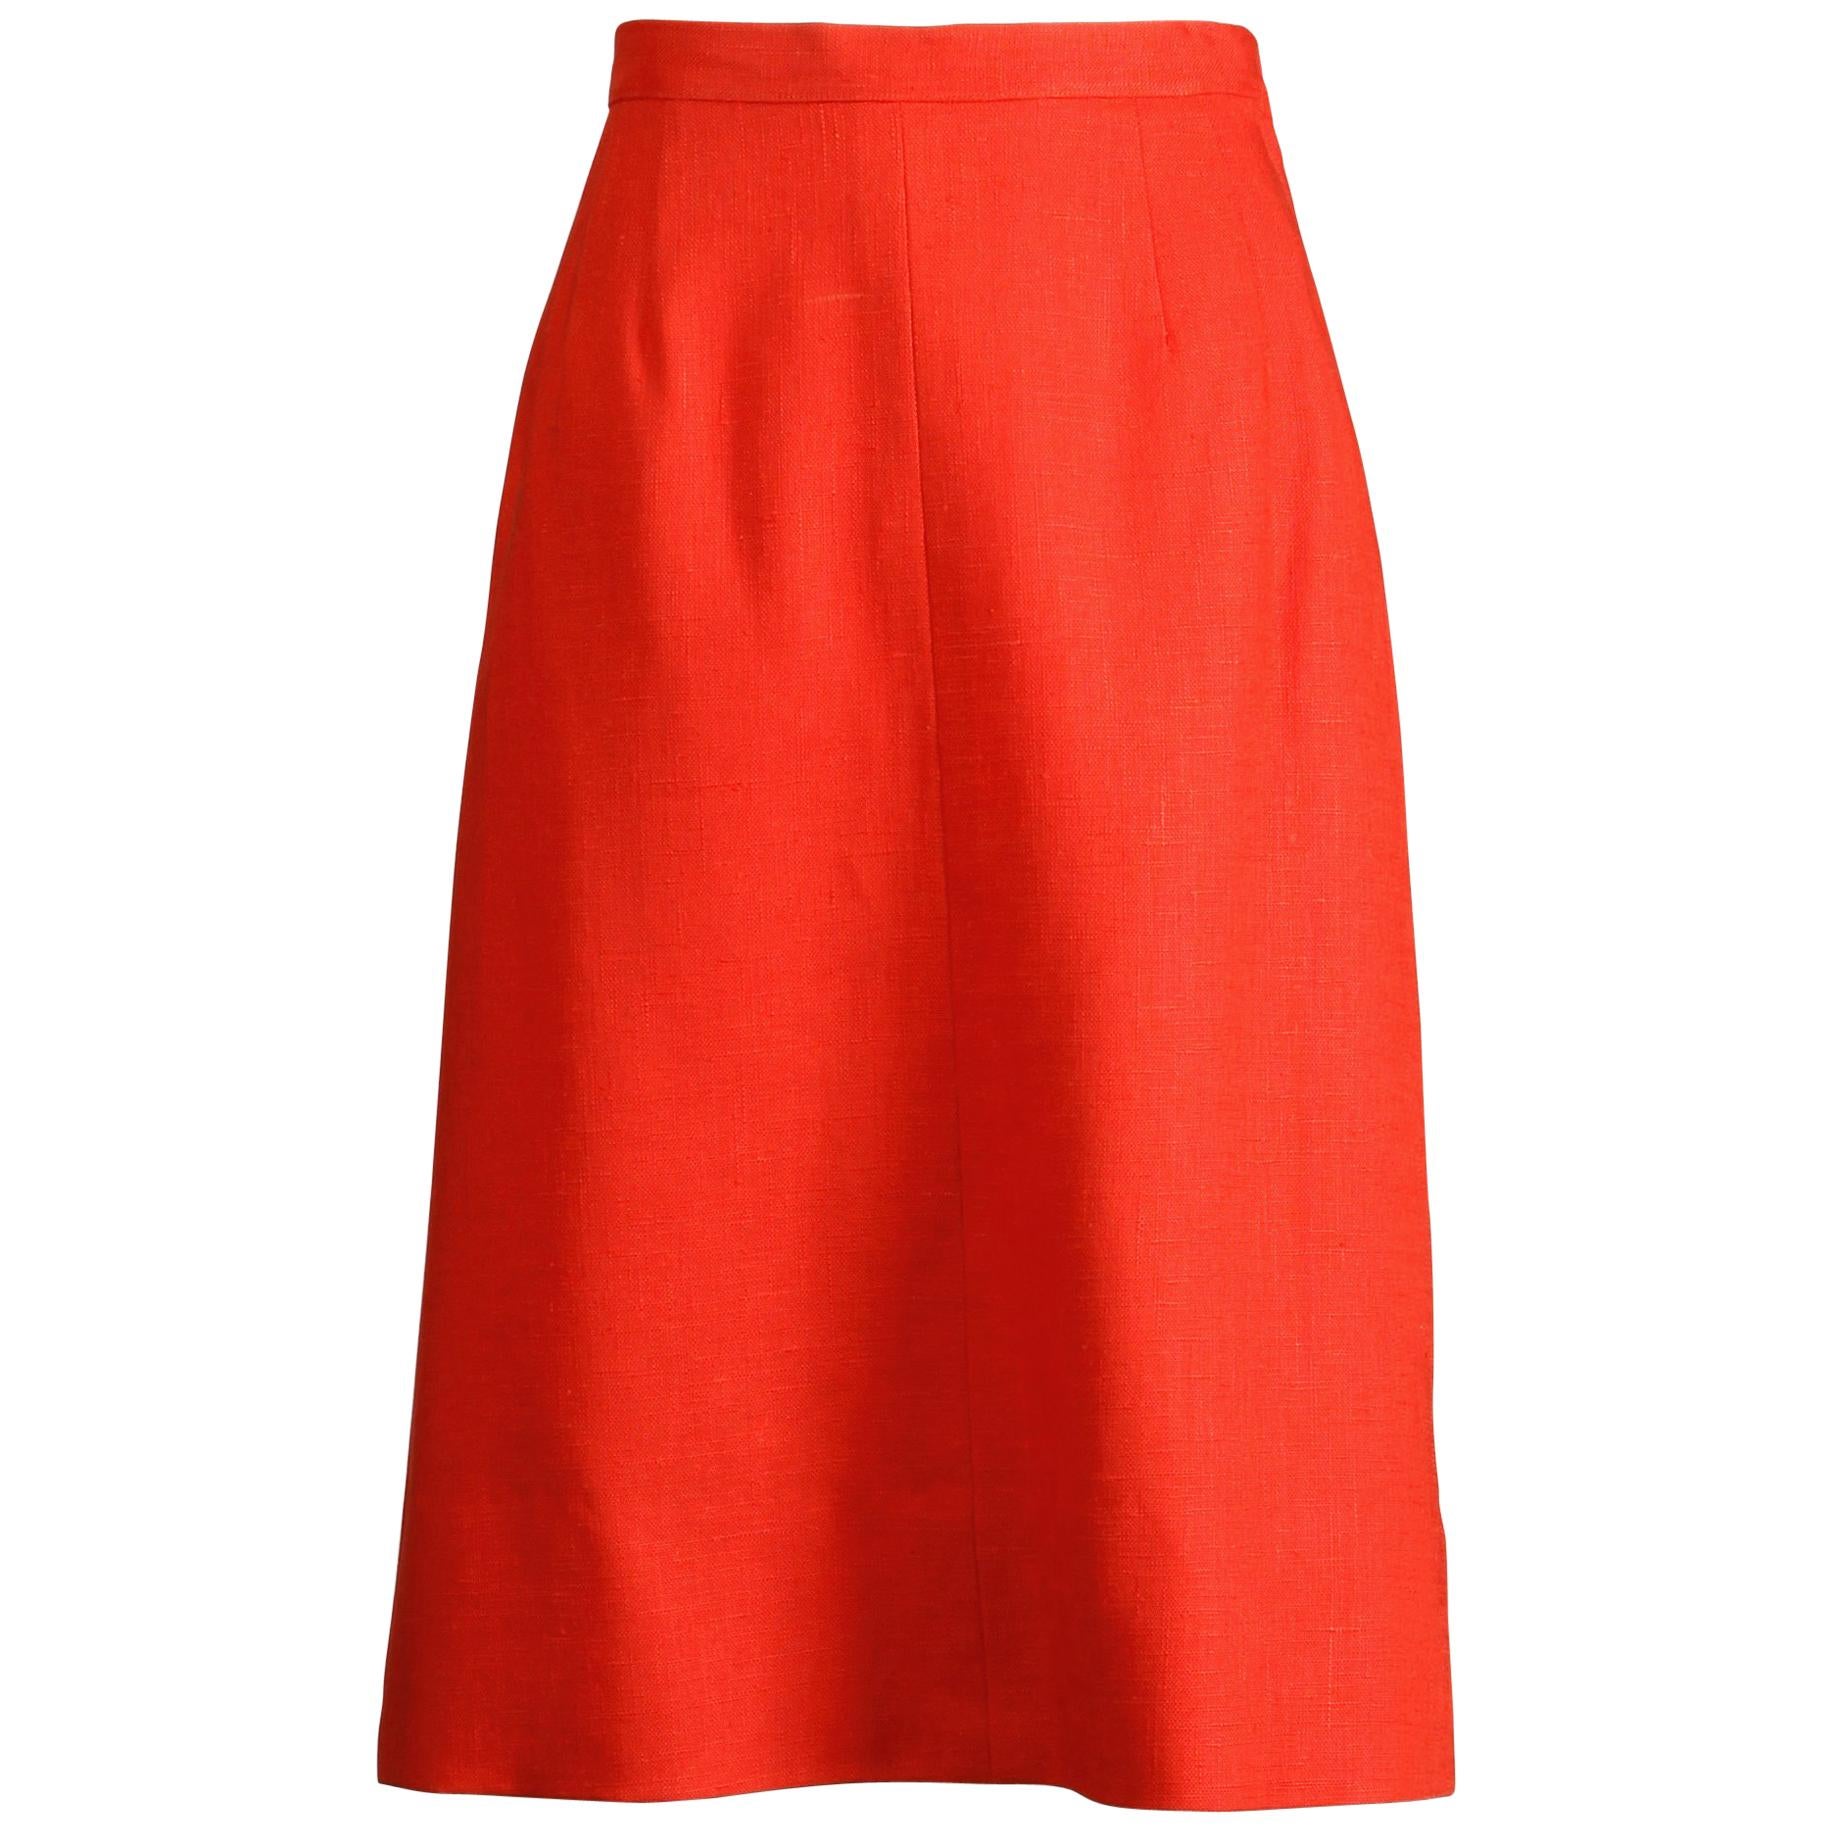 1962 B.H. Wragge Vintage Red Woven Linen/ Silk Pencil Skirt